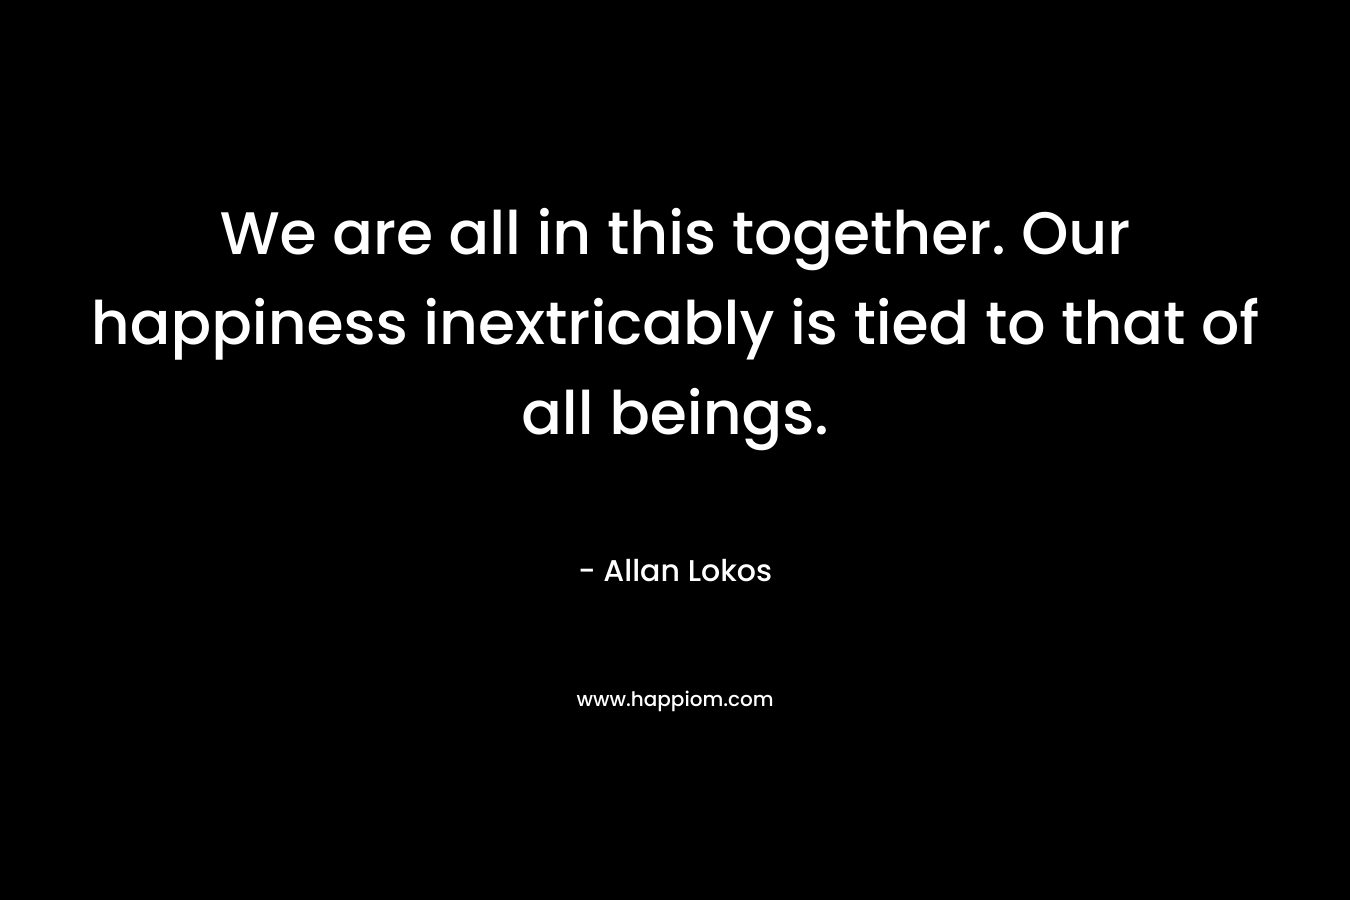 We are all in this together. Our happiness inextricably is tied to that of all beings.